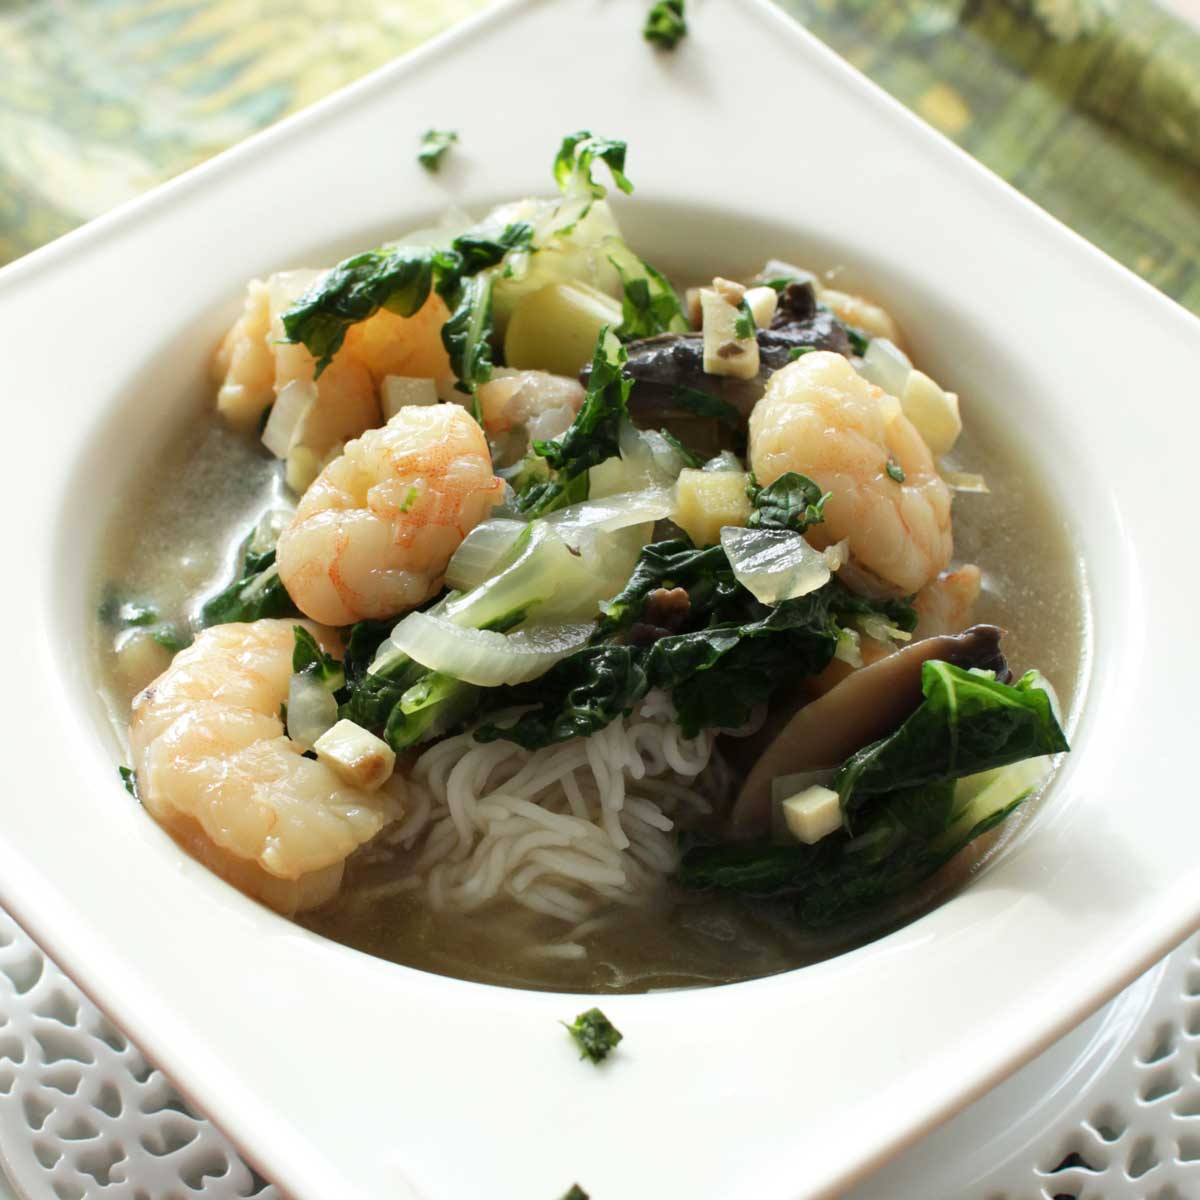 Cream of Shrimp Soup - Definition and Cooking Information 